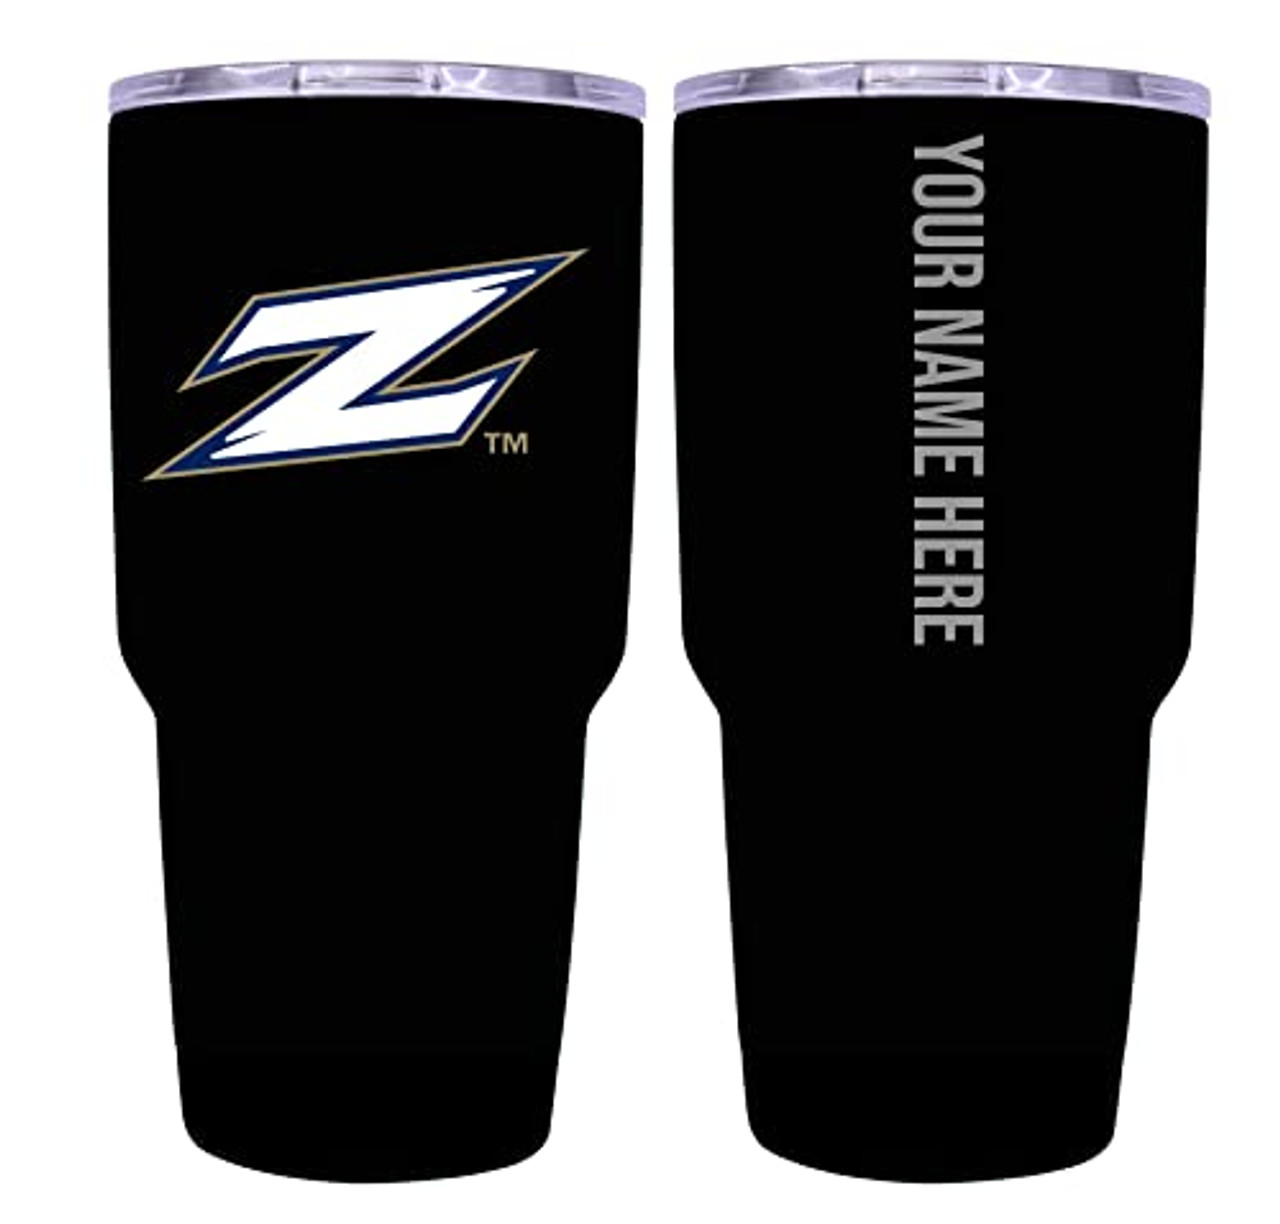 Collegiate Custom Personalized Akron Zips, 24 oz Insulated Stainless Steel Tumbler with Engraved Name (Black)